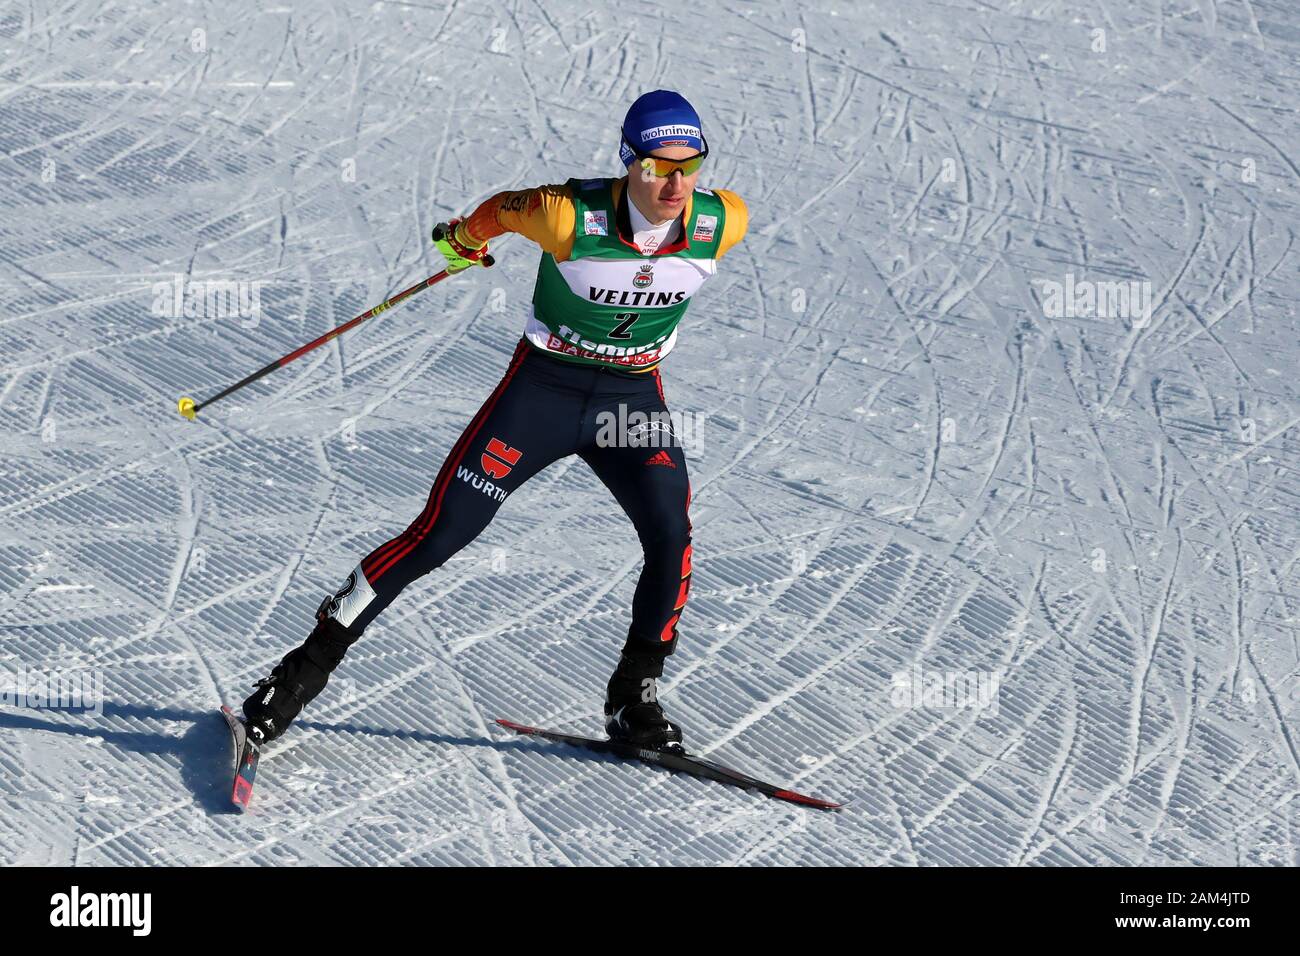 Trento, Italy. 11th January 2020; Lago Di Tesero, Val Di Fiemme, Trento, Italy; International Ski Federation World Cup, FIS Nordic Combined Val Di Fiemme, Manuel Faisst (GER) - Editorial Use Credit: Action Plus Sports Images/Alamy Live News Stock Photo